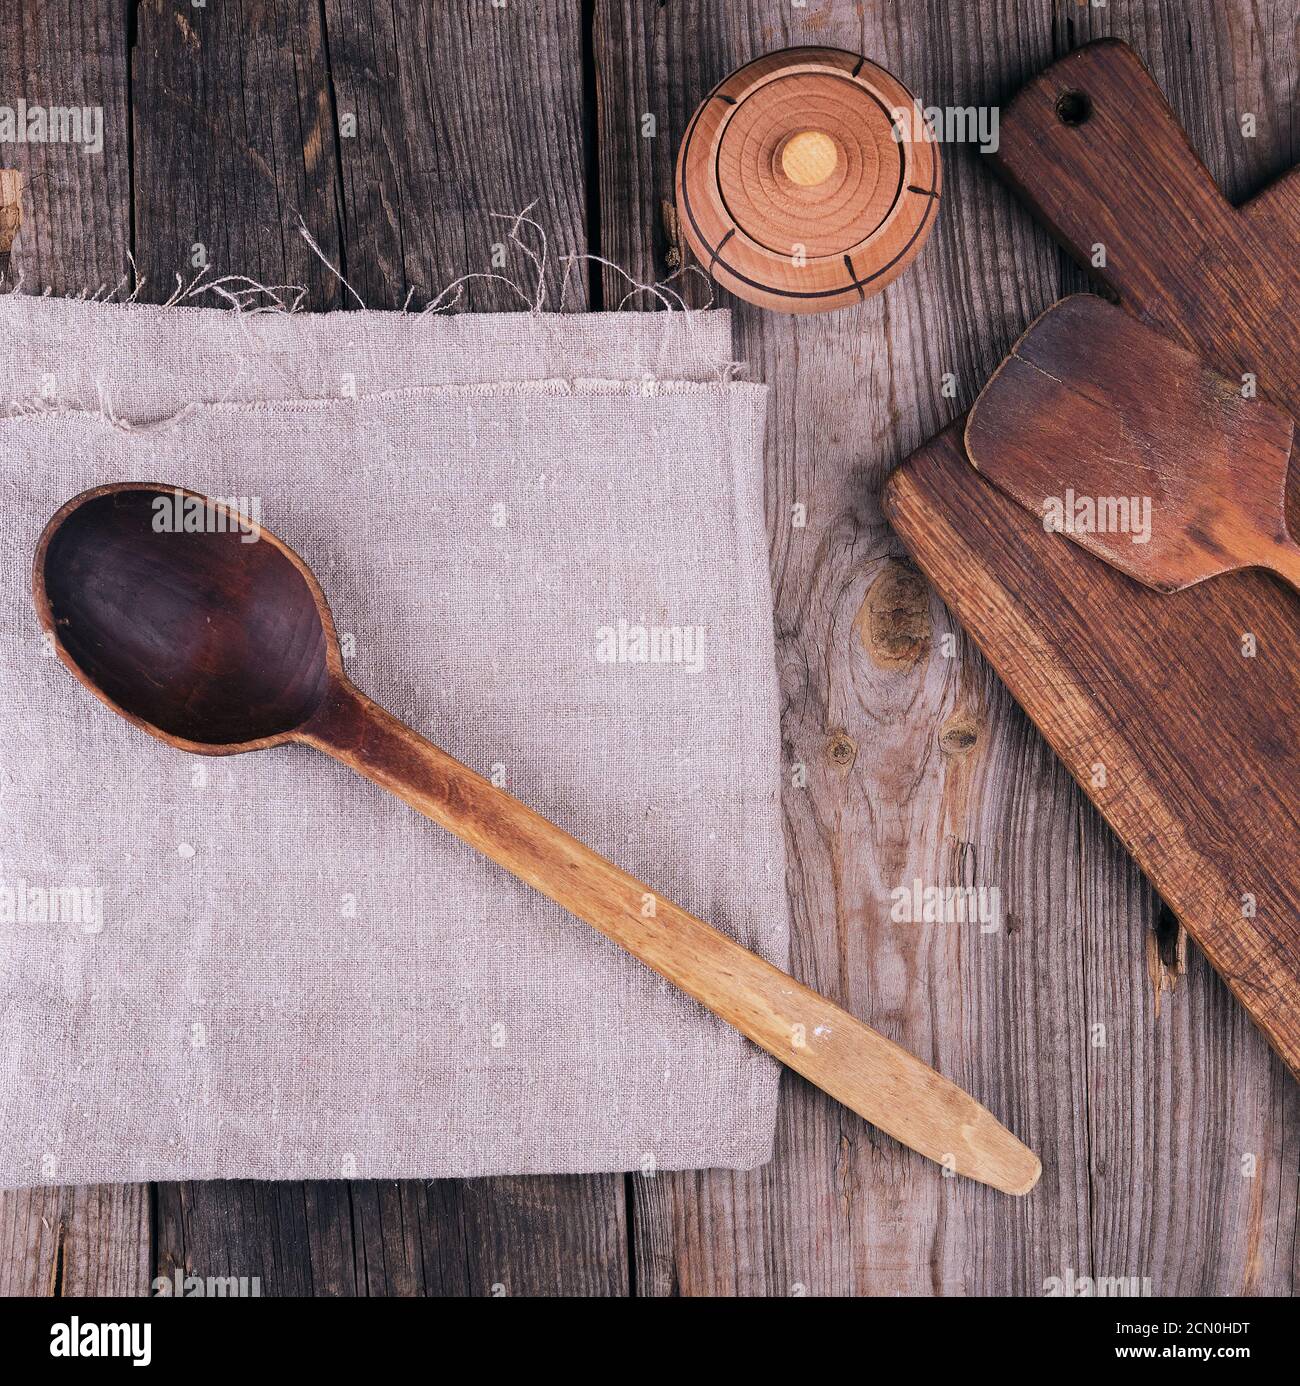 very old empty wooden spoon and rectangular cutting board Stock Photo